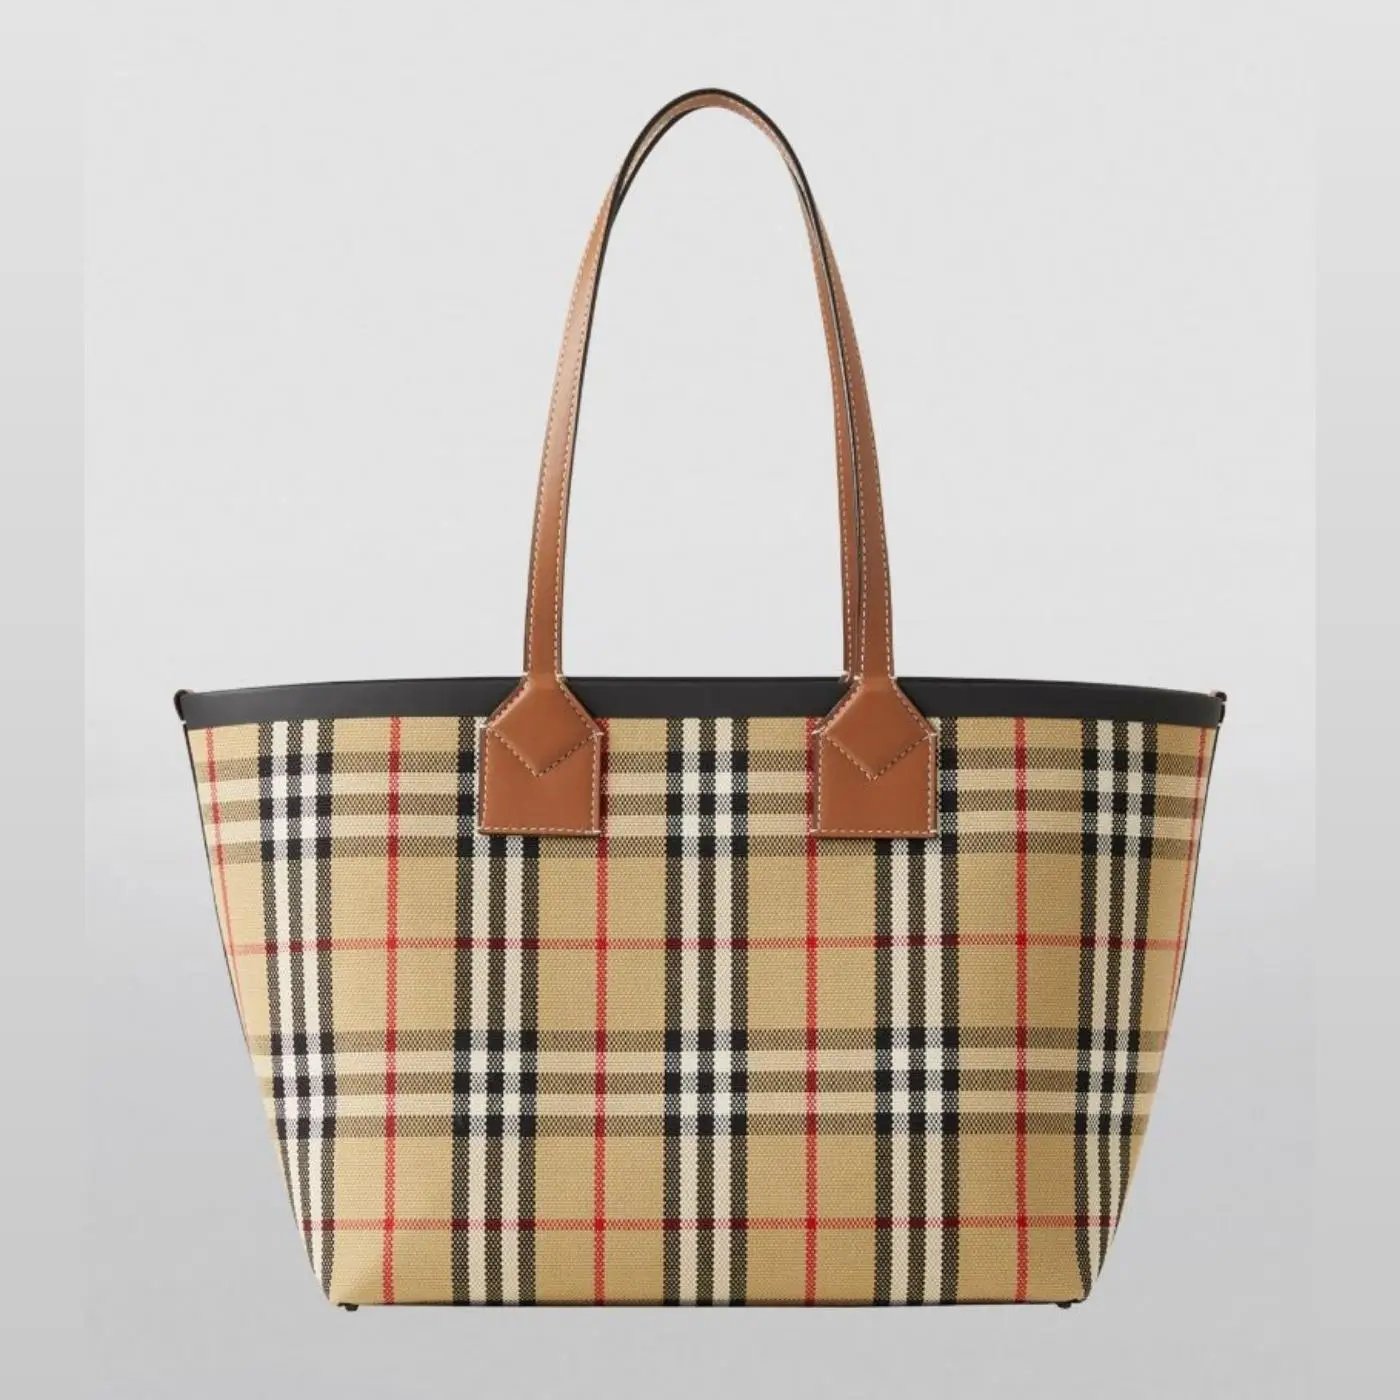 Small Canvas and Leather London Tote Handbags BURBERRY - LOLAMIR